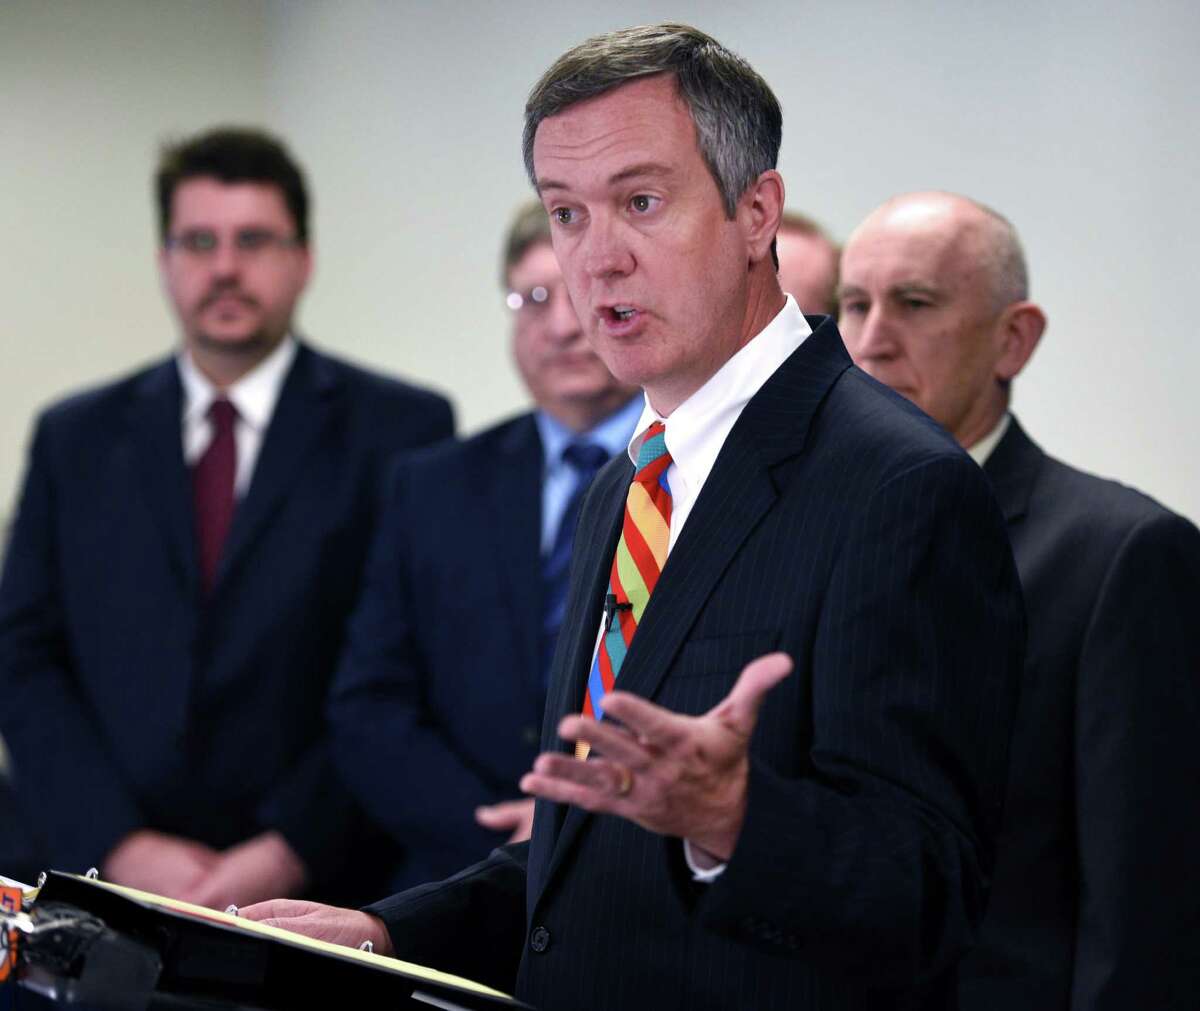 Tennessee Secretary of State Tre Hargett announces a federal lawsuit against several cancer charities Tuesday, May 19, 2015, in Knoxville, Tenn. A Tennessee man and his family used much of the $187 million it collected for cancer patients to buy themselves cars, gym memberships and take luxury cruise vacations, federal officials alleged Tuesday. (Michael Patrick/Knoxville News Sentinel, via AP)